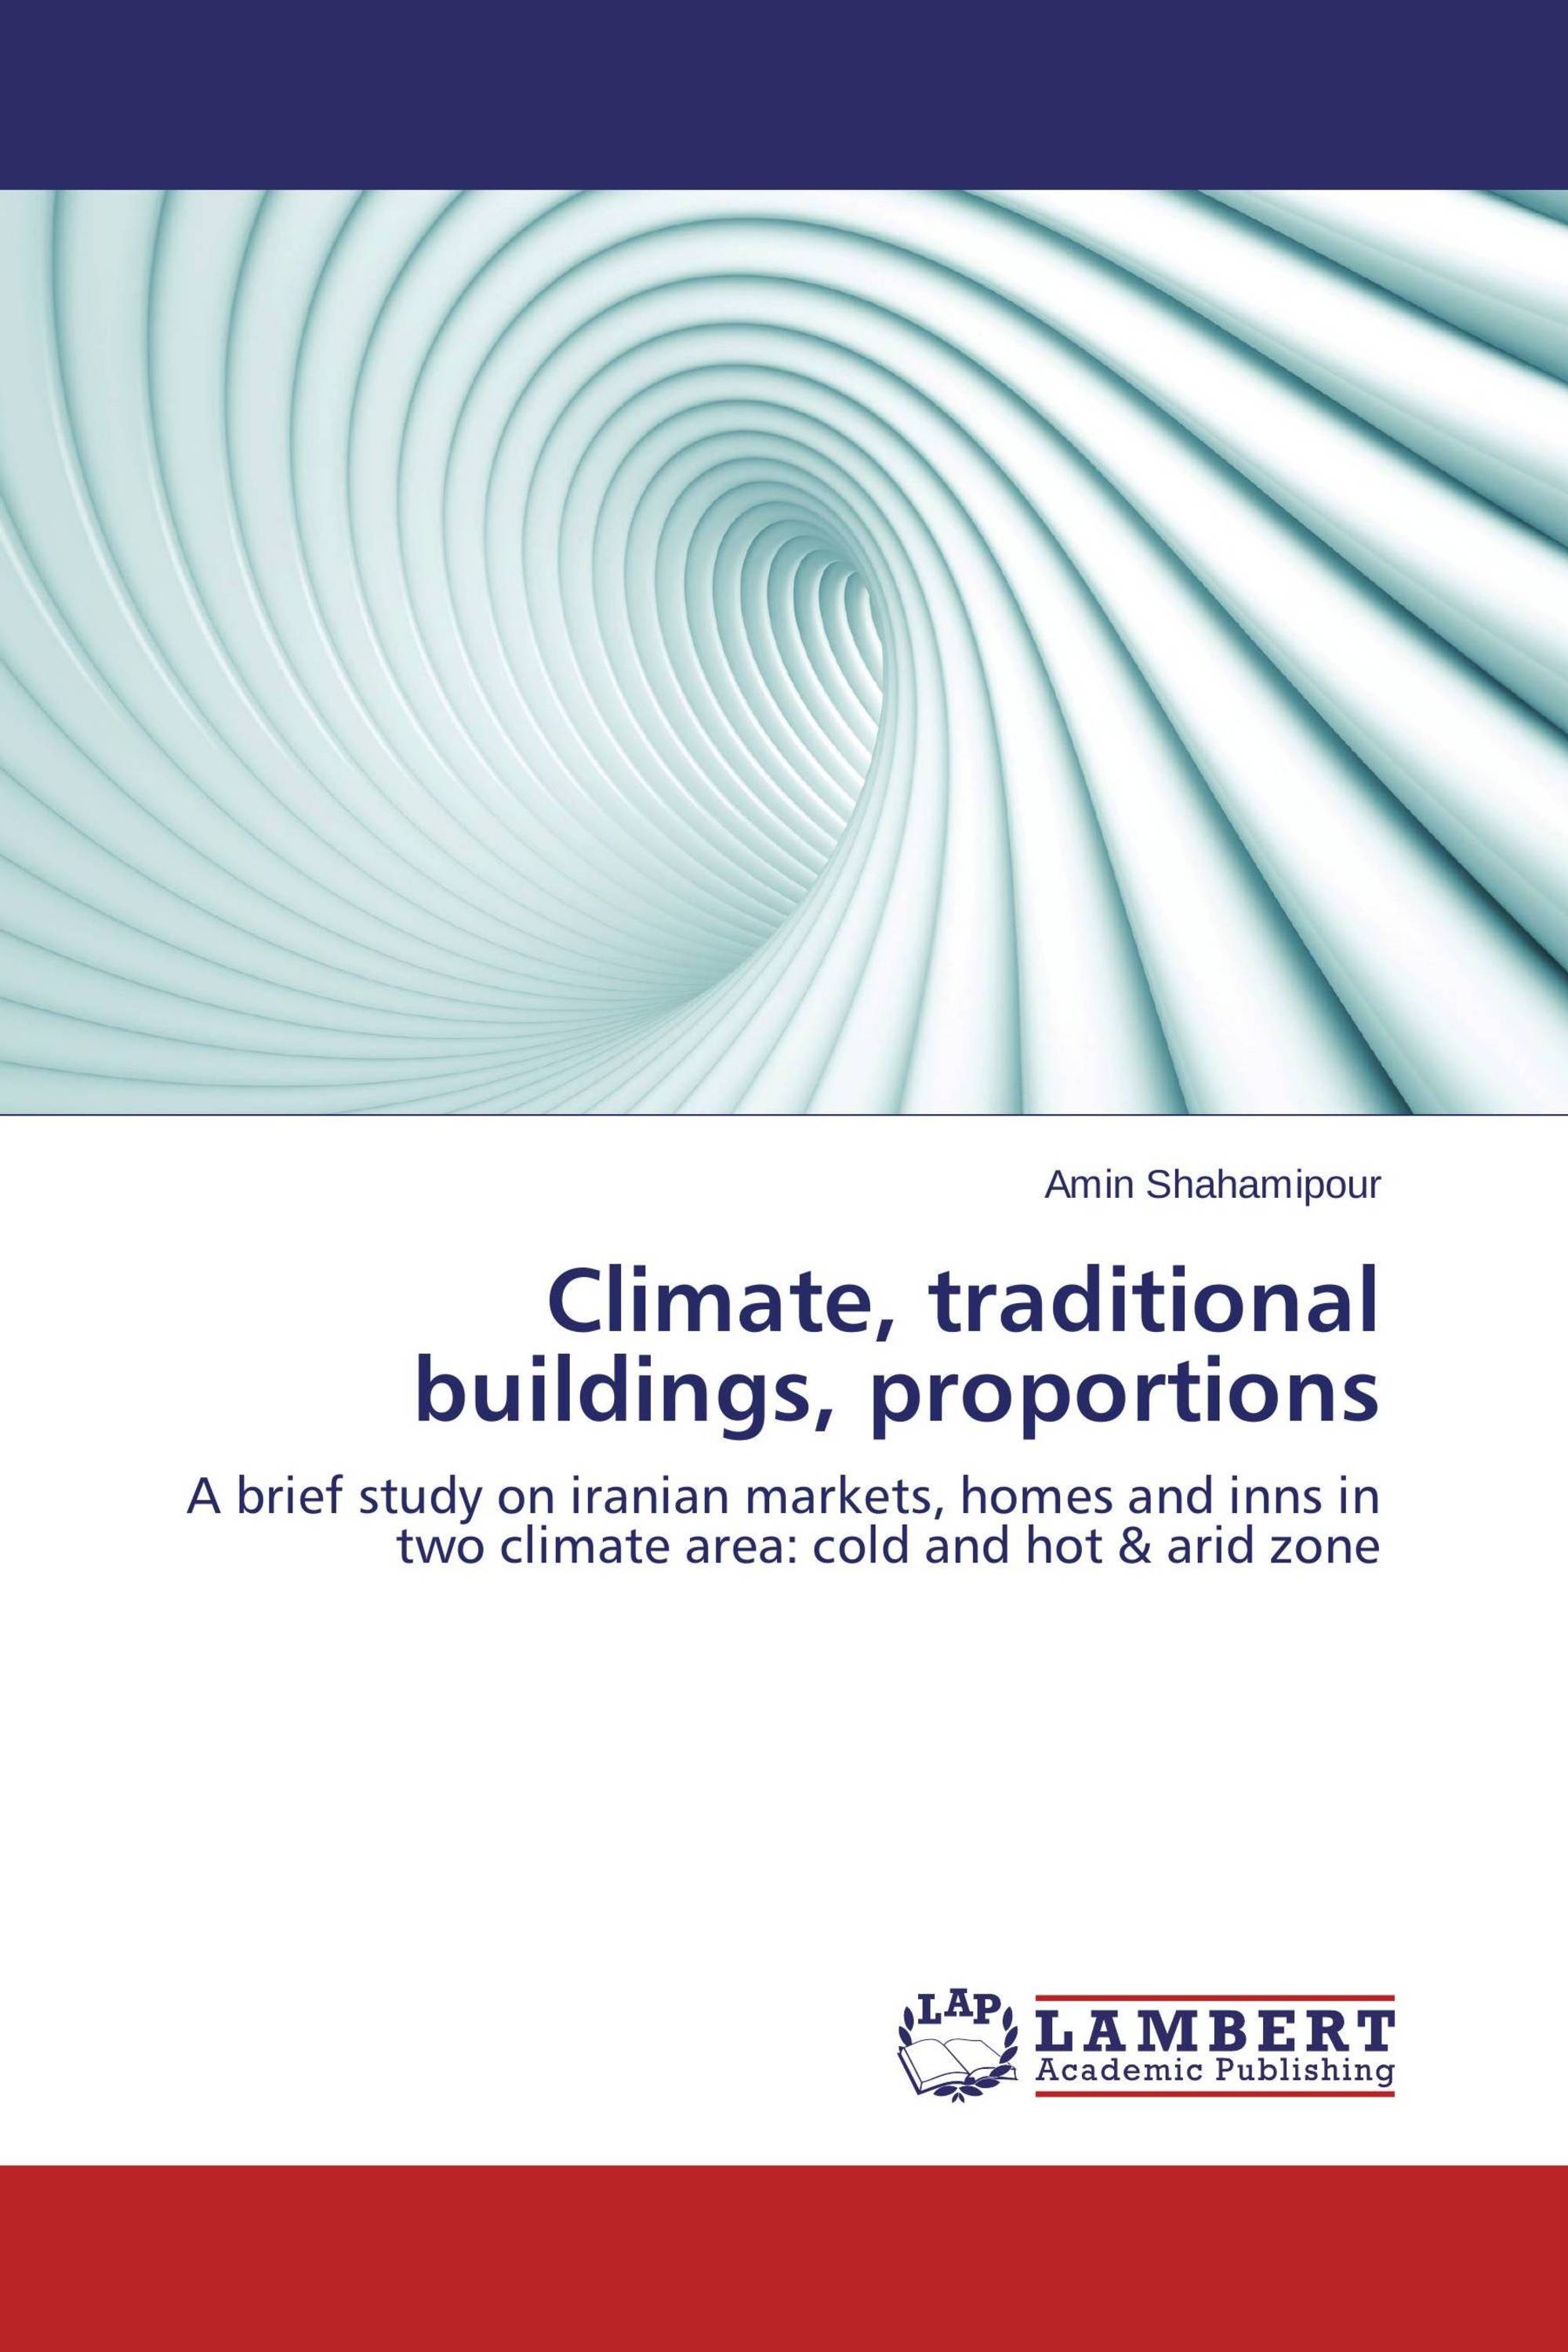 Climate, traditional buildings, proportions